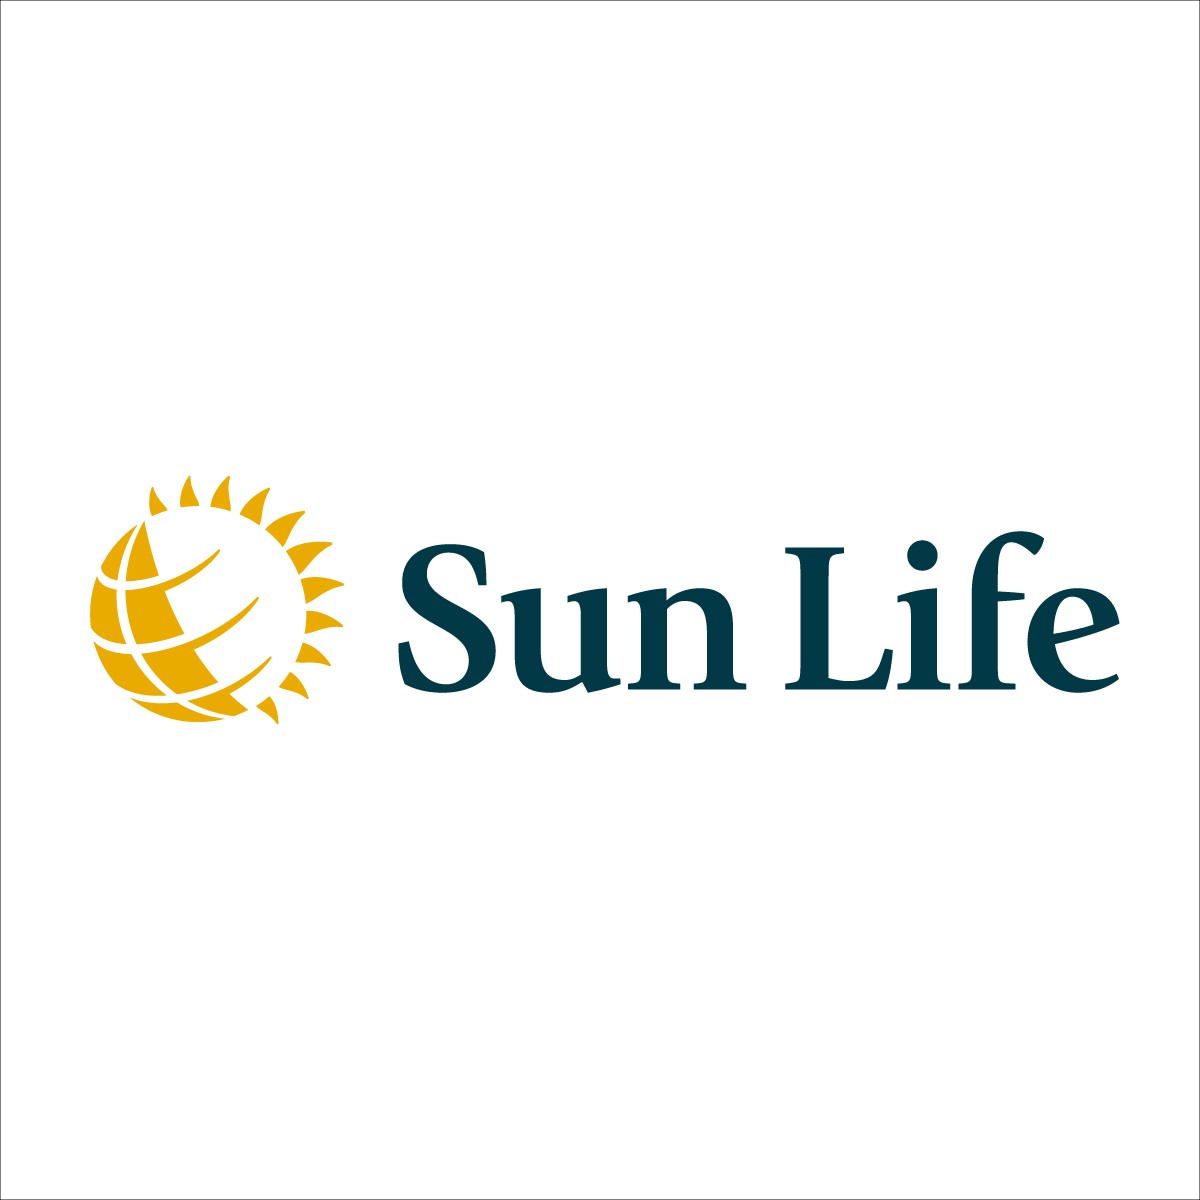 Sun Life marks 125th anniversary in the Philippines | Sun Life Philippines